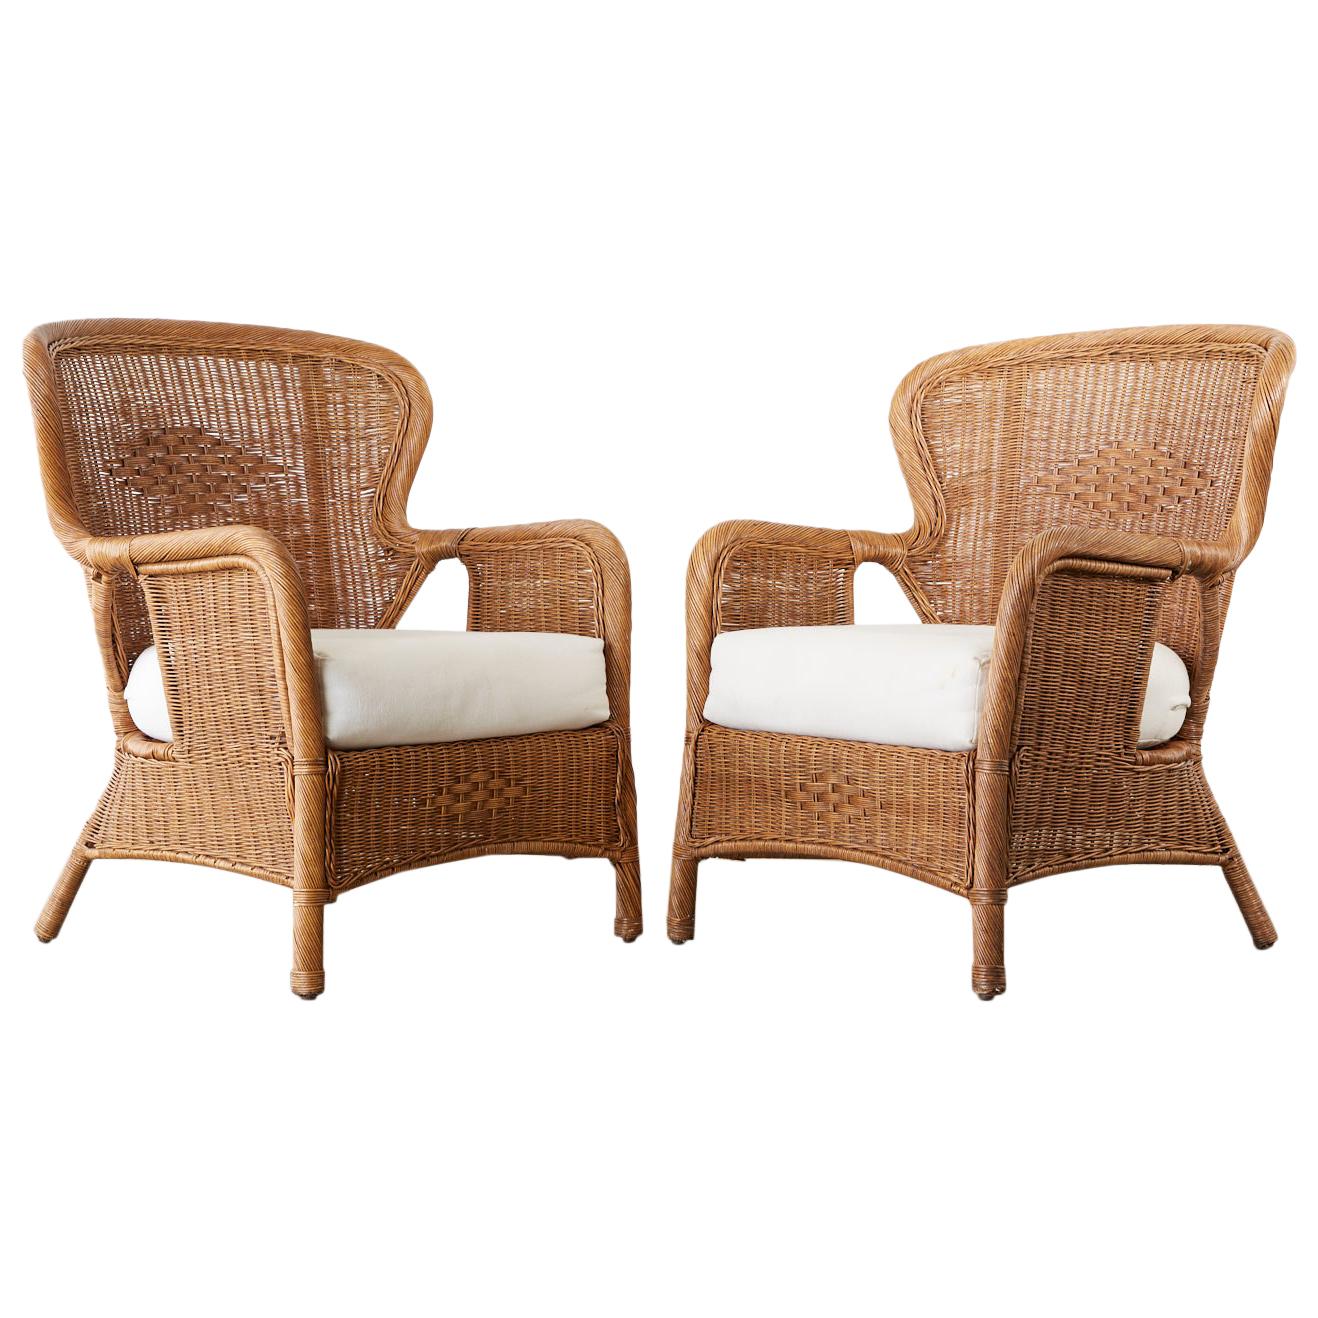 Rustic Pair of Wicker Wrapped Wingback Chairs